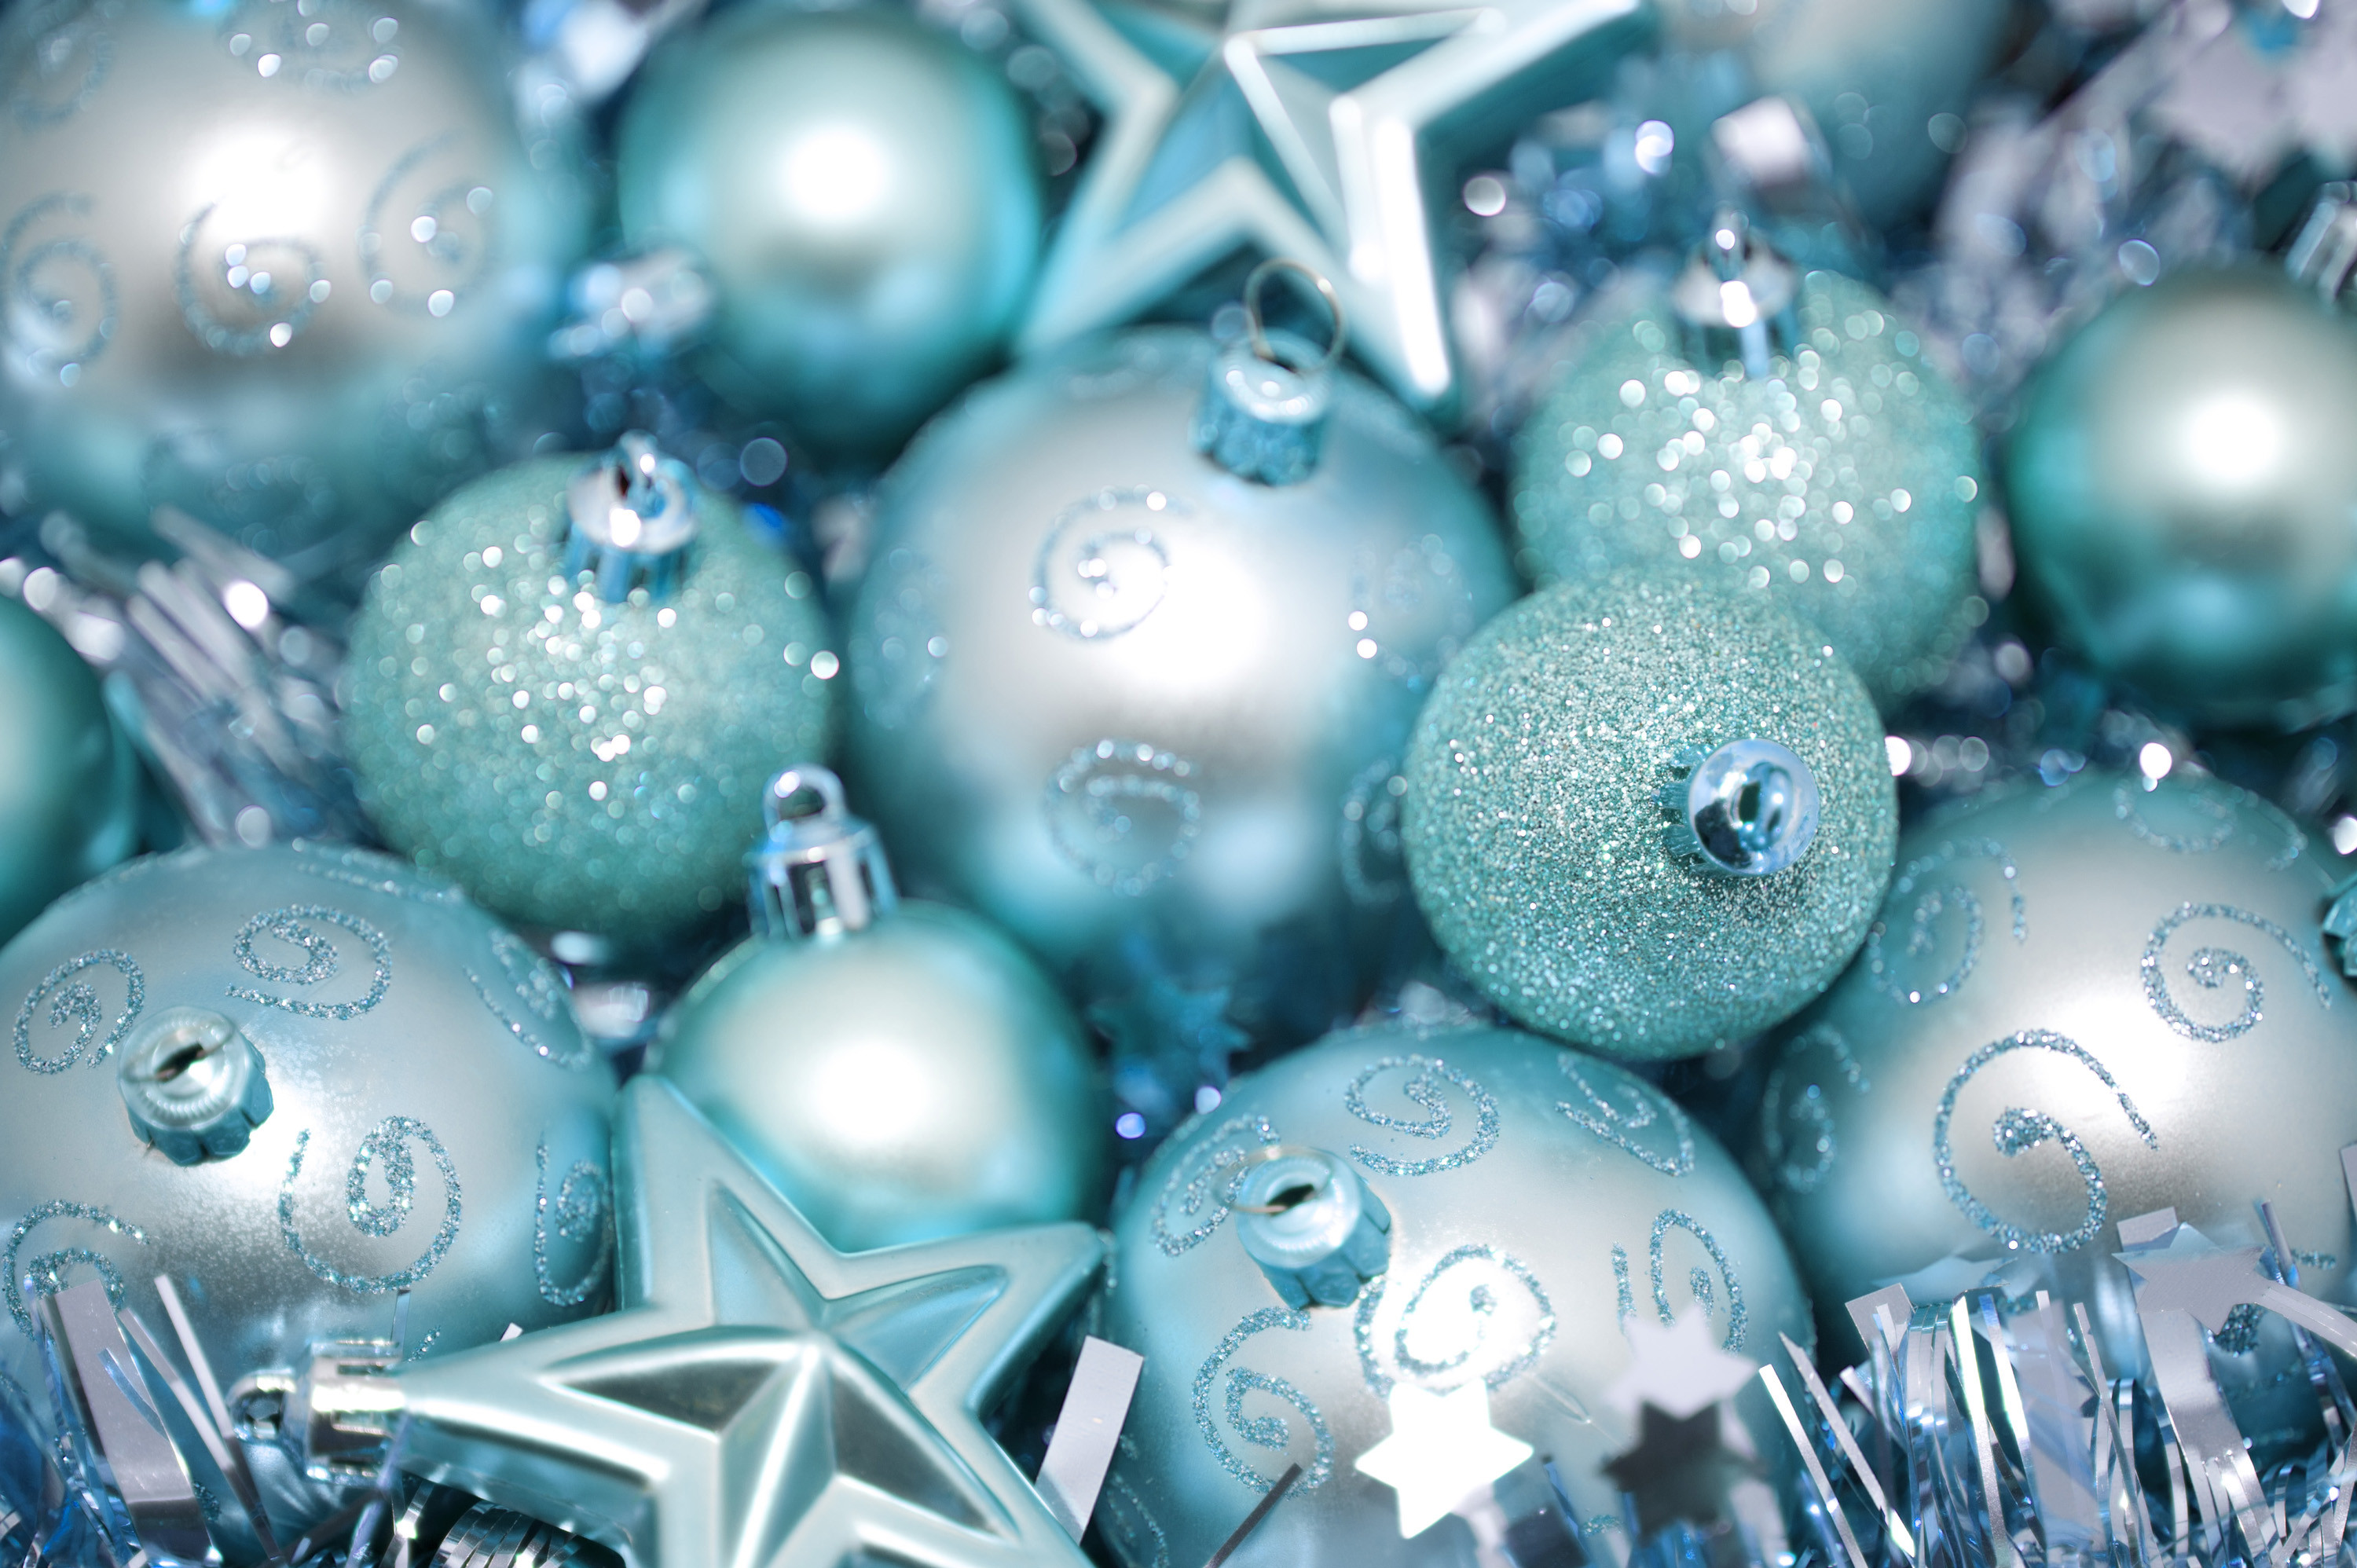 3000x1996 Cyan blue Christmas bauble and star background for your seasonal greetings